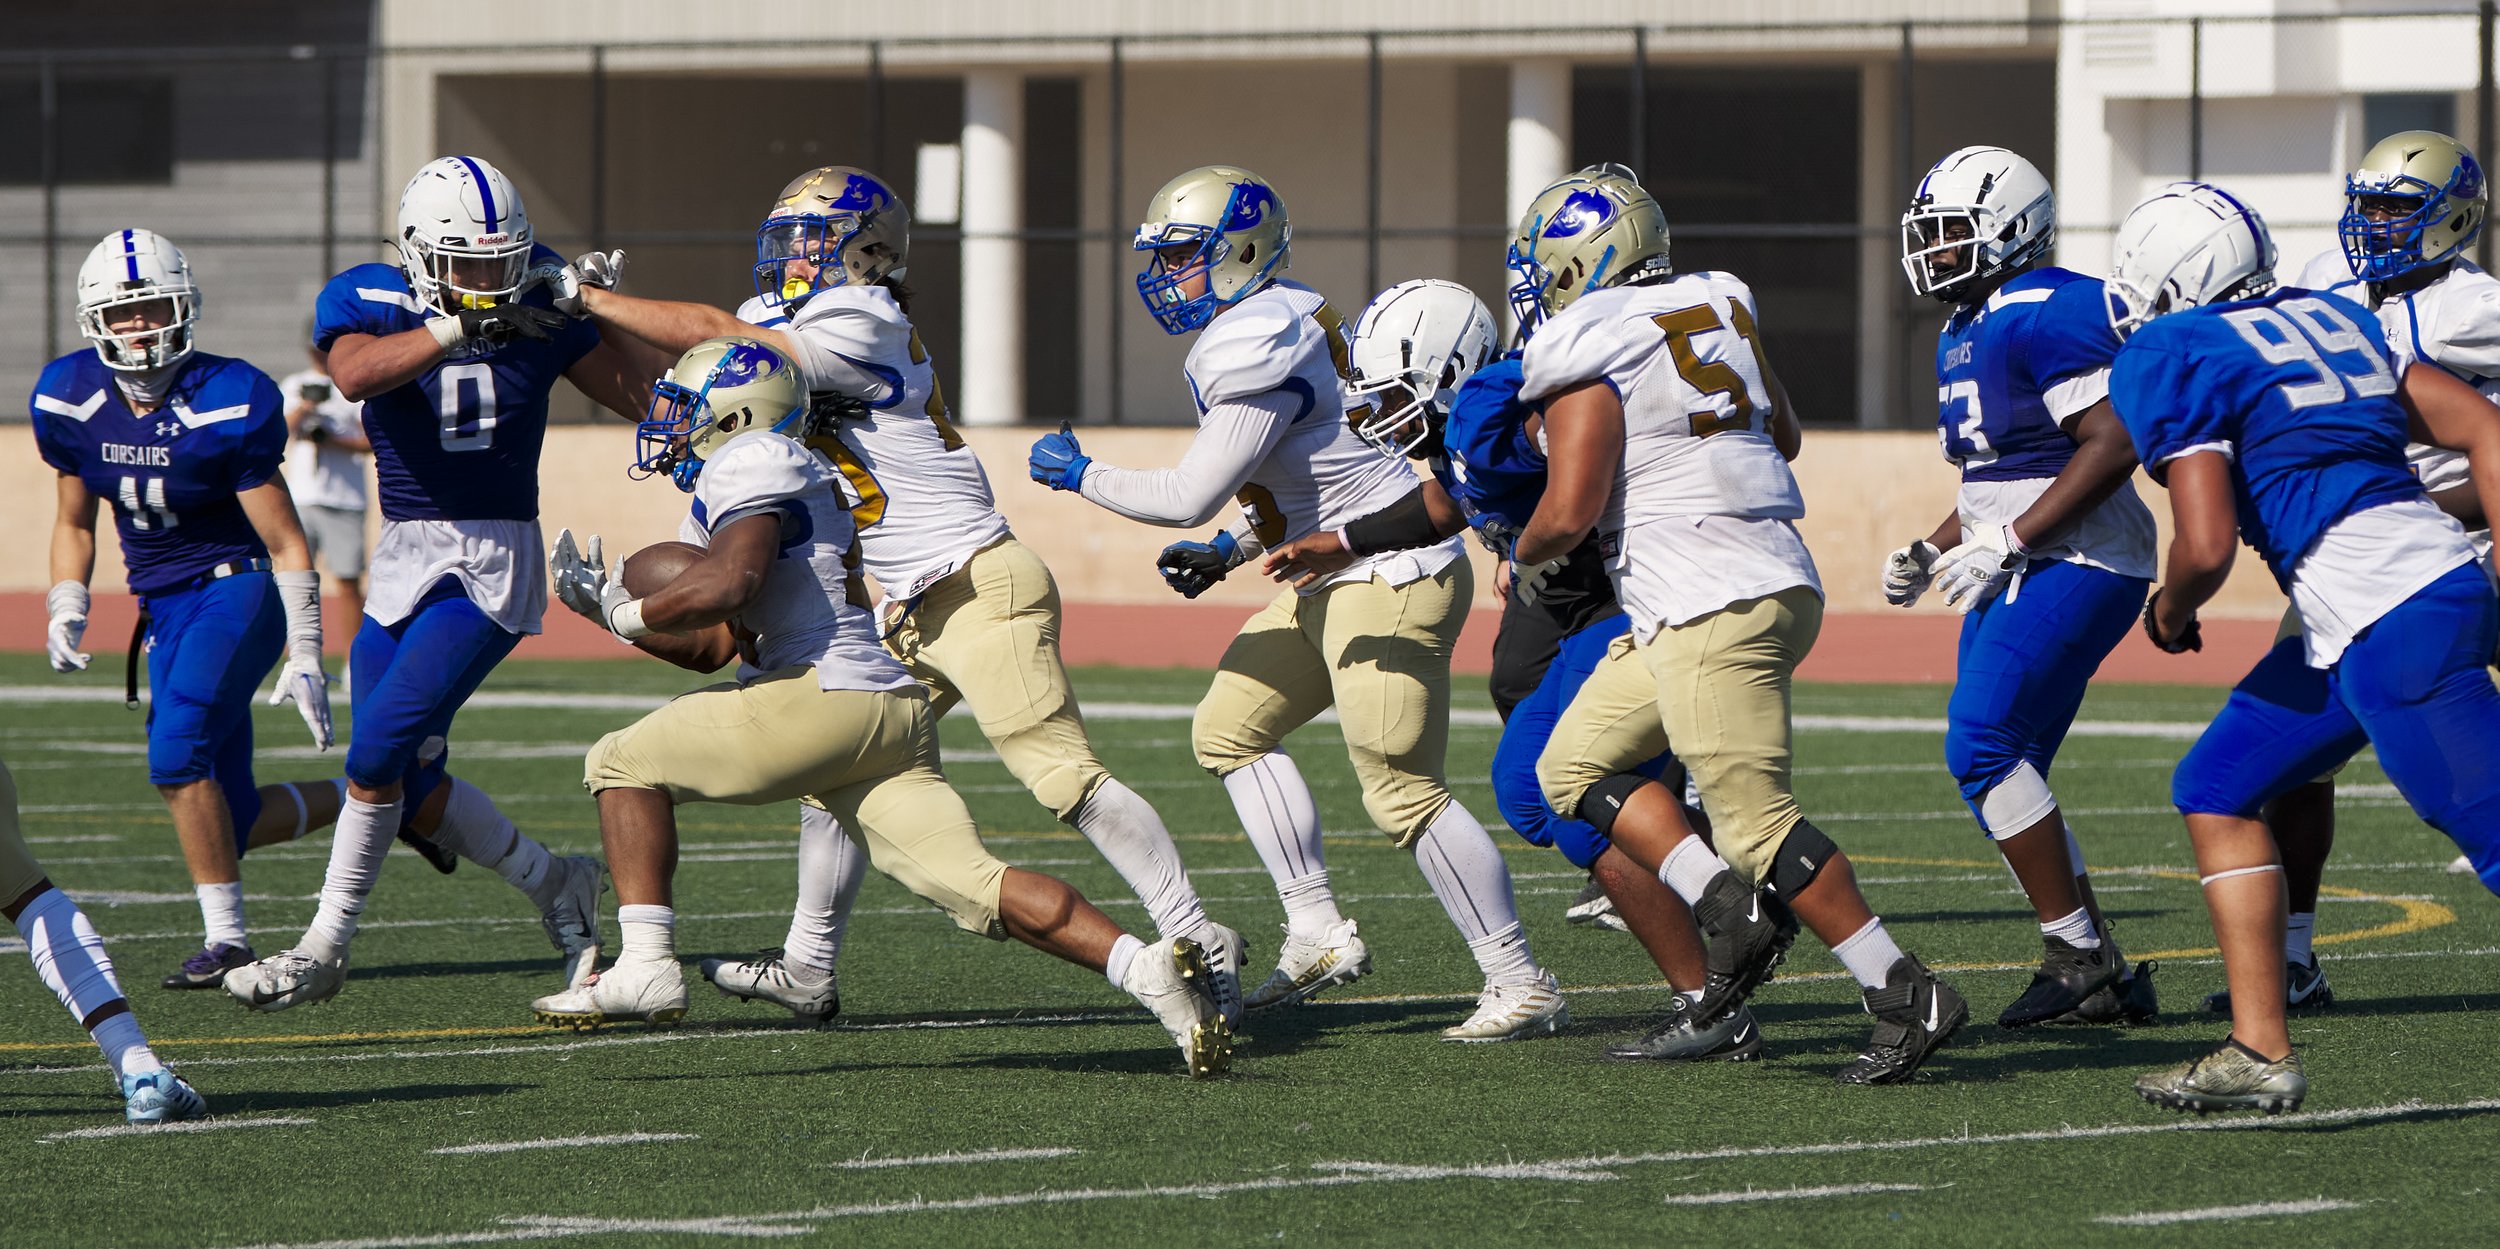  The football match between the Santa Monica College Corsairs and the West Los Angeles College Wildcats on Saturday, October 1, 2022, at Corsair Field in Santa Monica, Calif. The Corsairs won 41-40. (Nicholas McCall | The Corsair) 